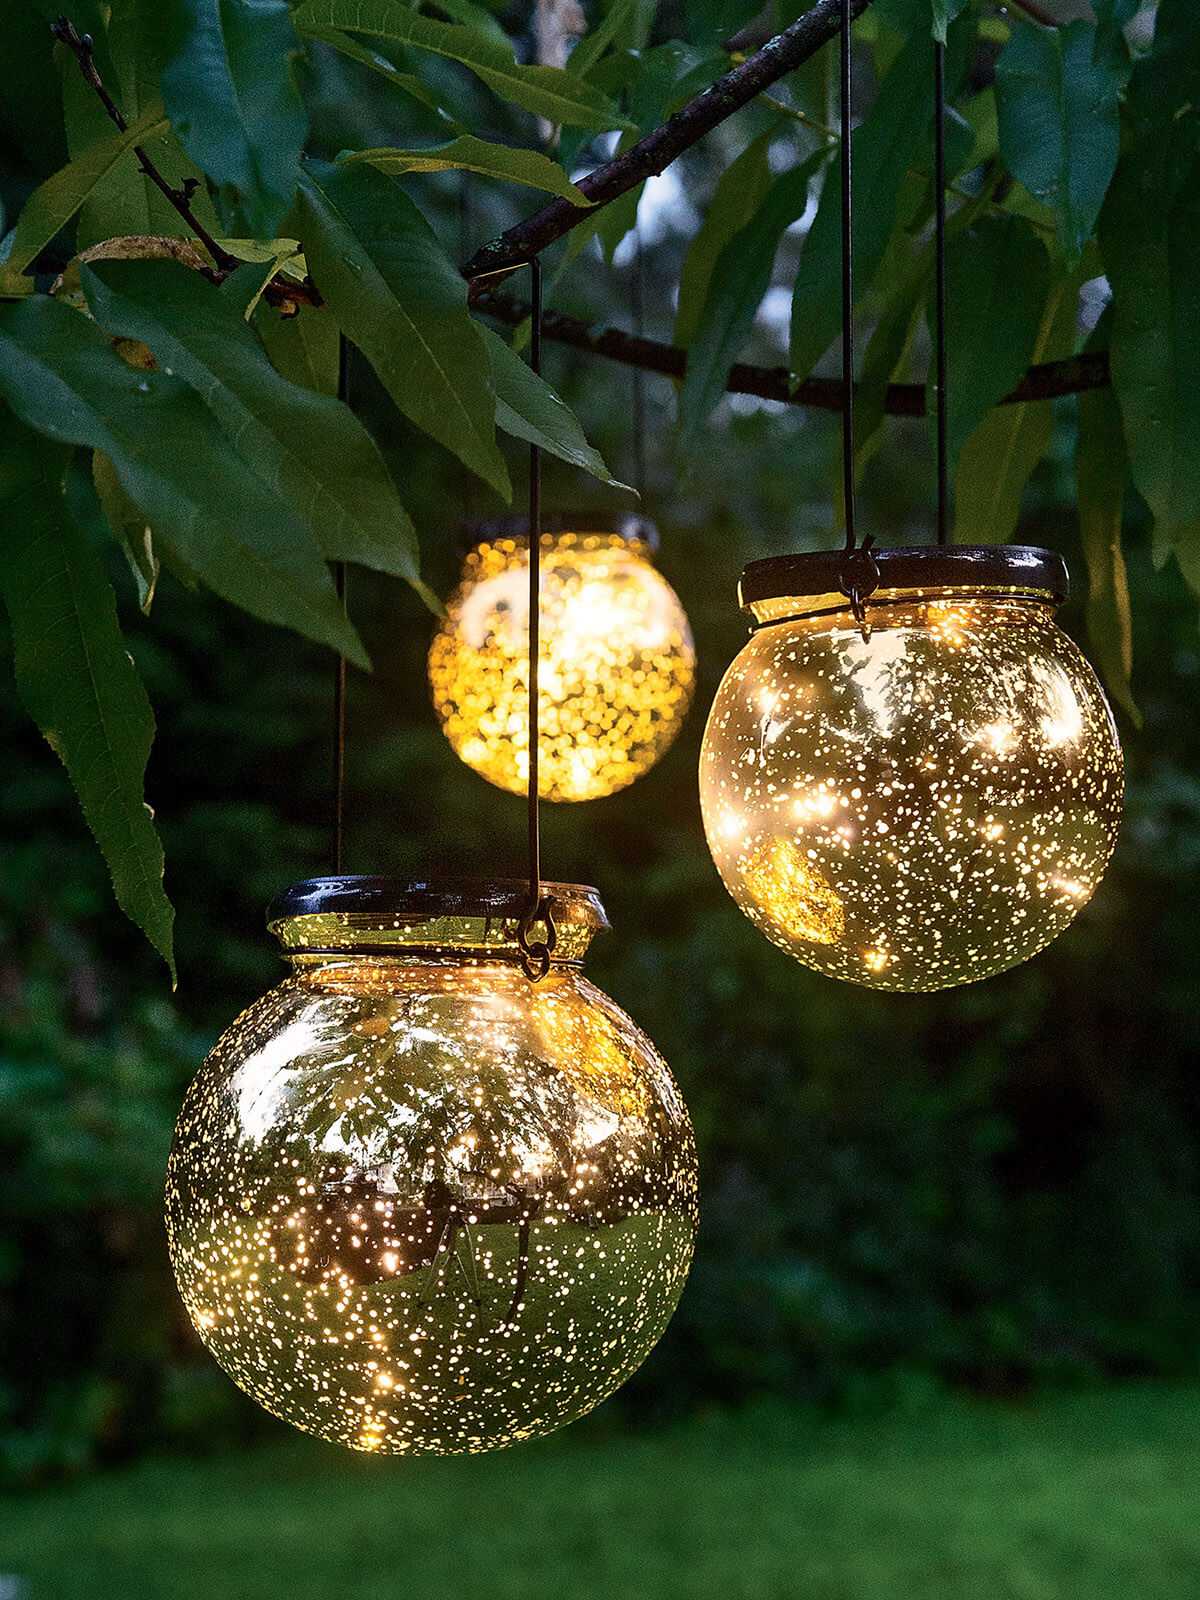 Check out these fantastic lighting ideas for backyards, front yards and gardens.